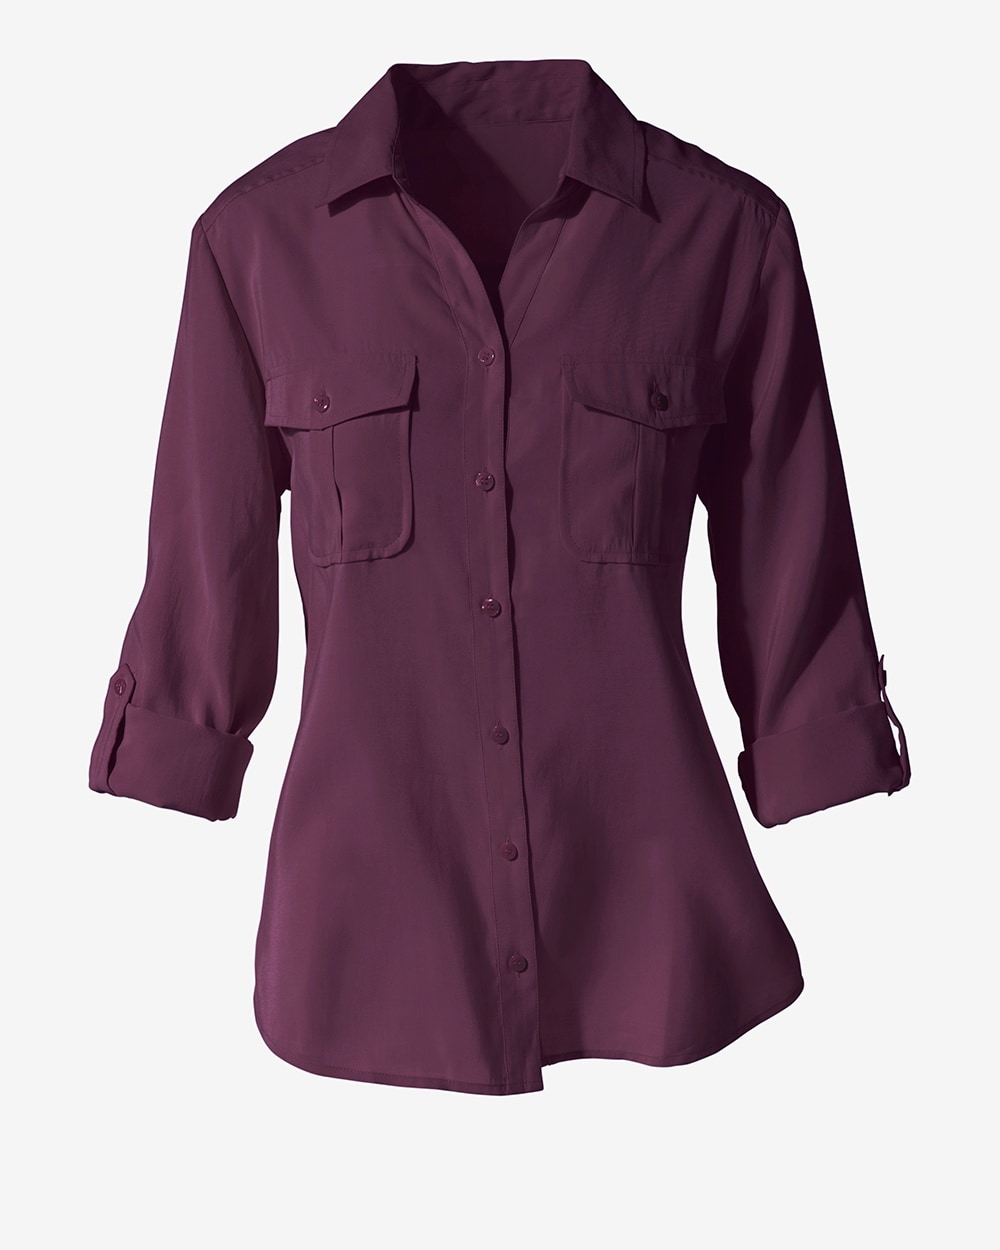 The Silky Chic Shirt